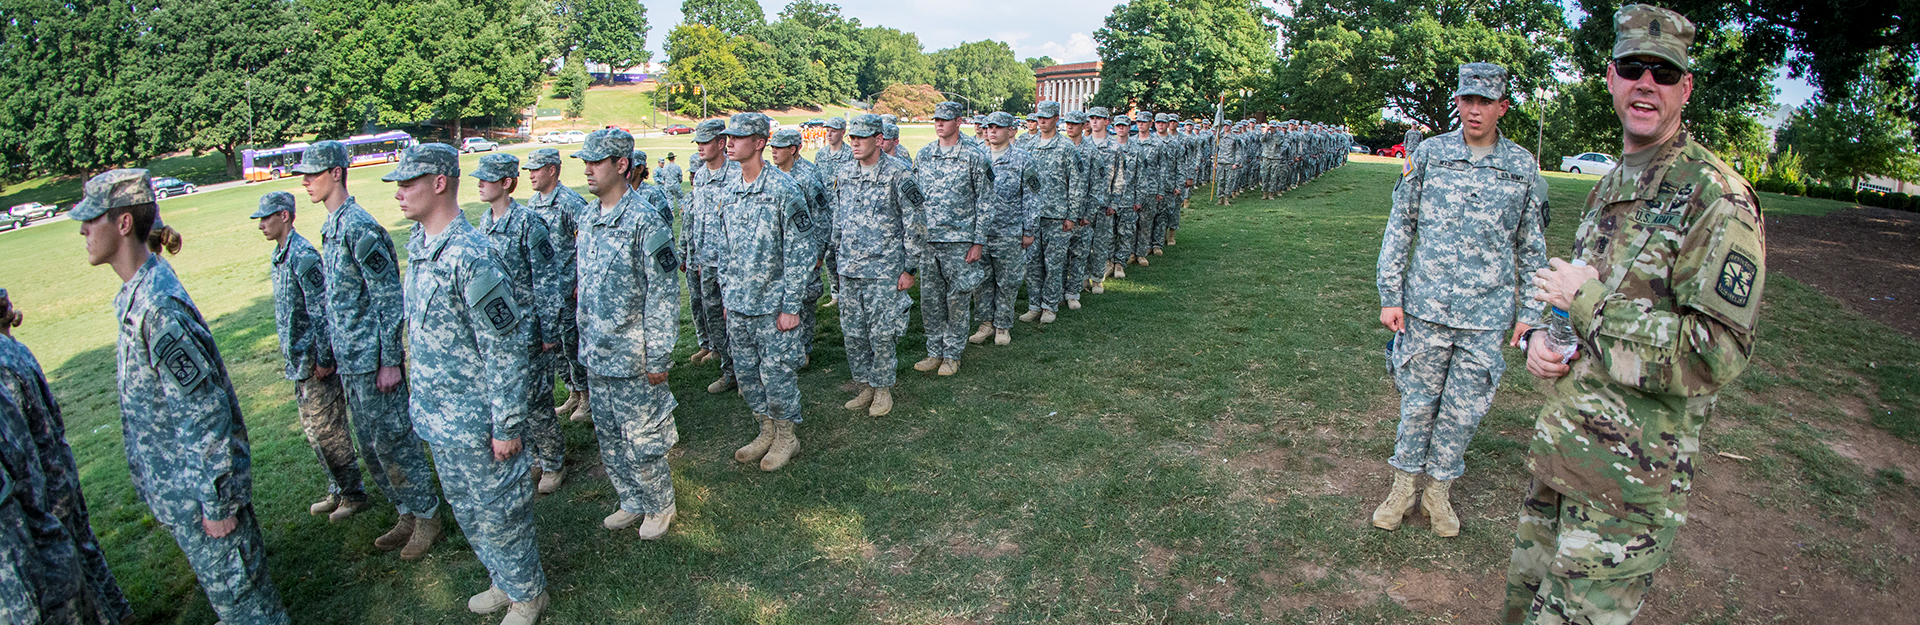 Cadets in camouflage marching in parade.